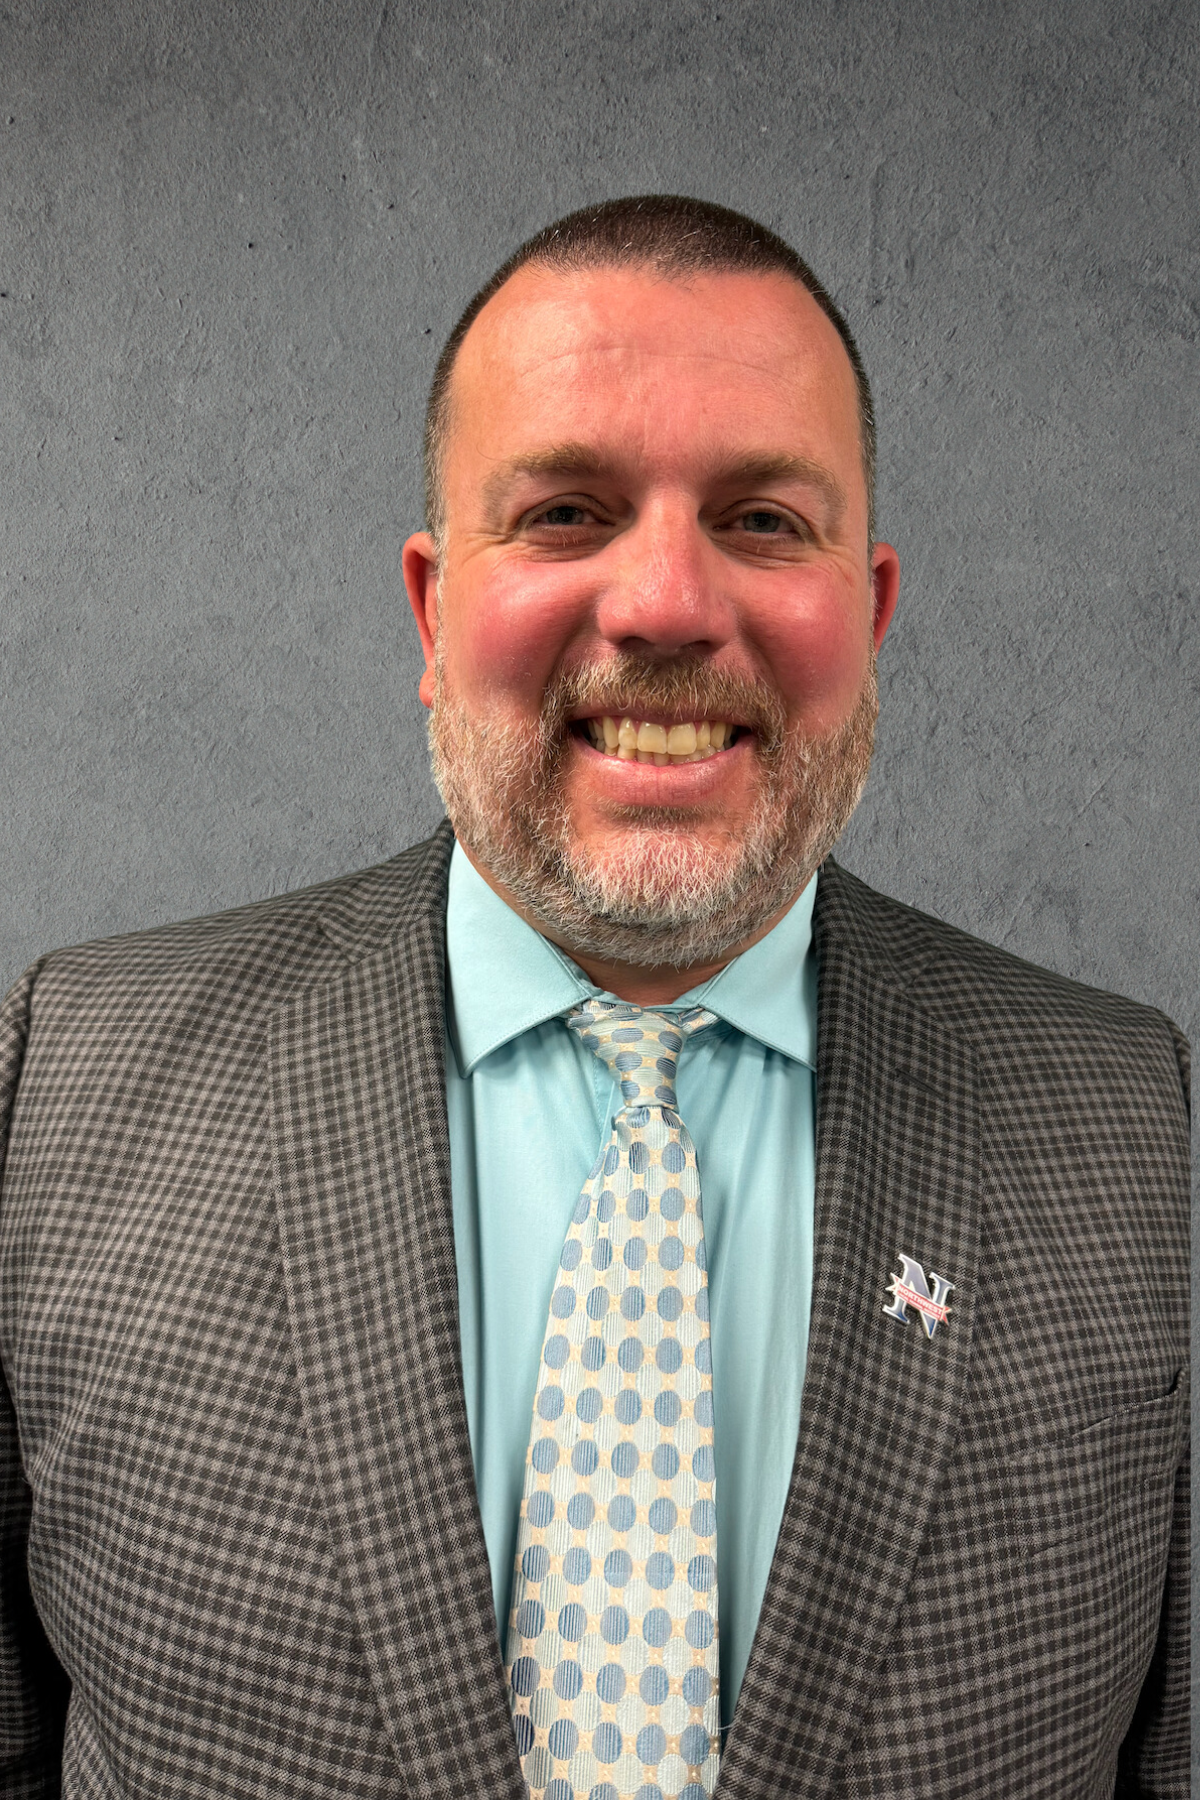 Dustin Gehring Selected as Principal of Colerain Middle School